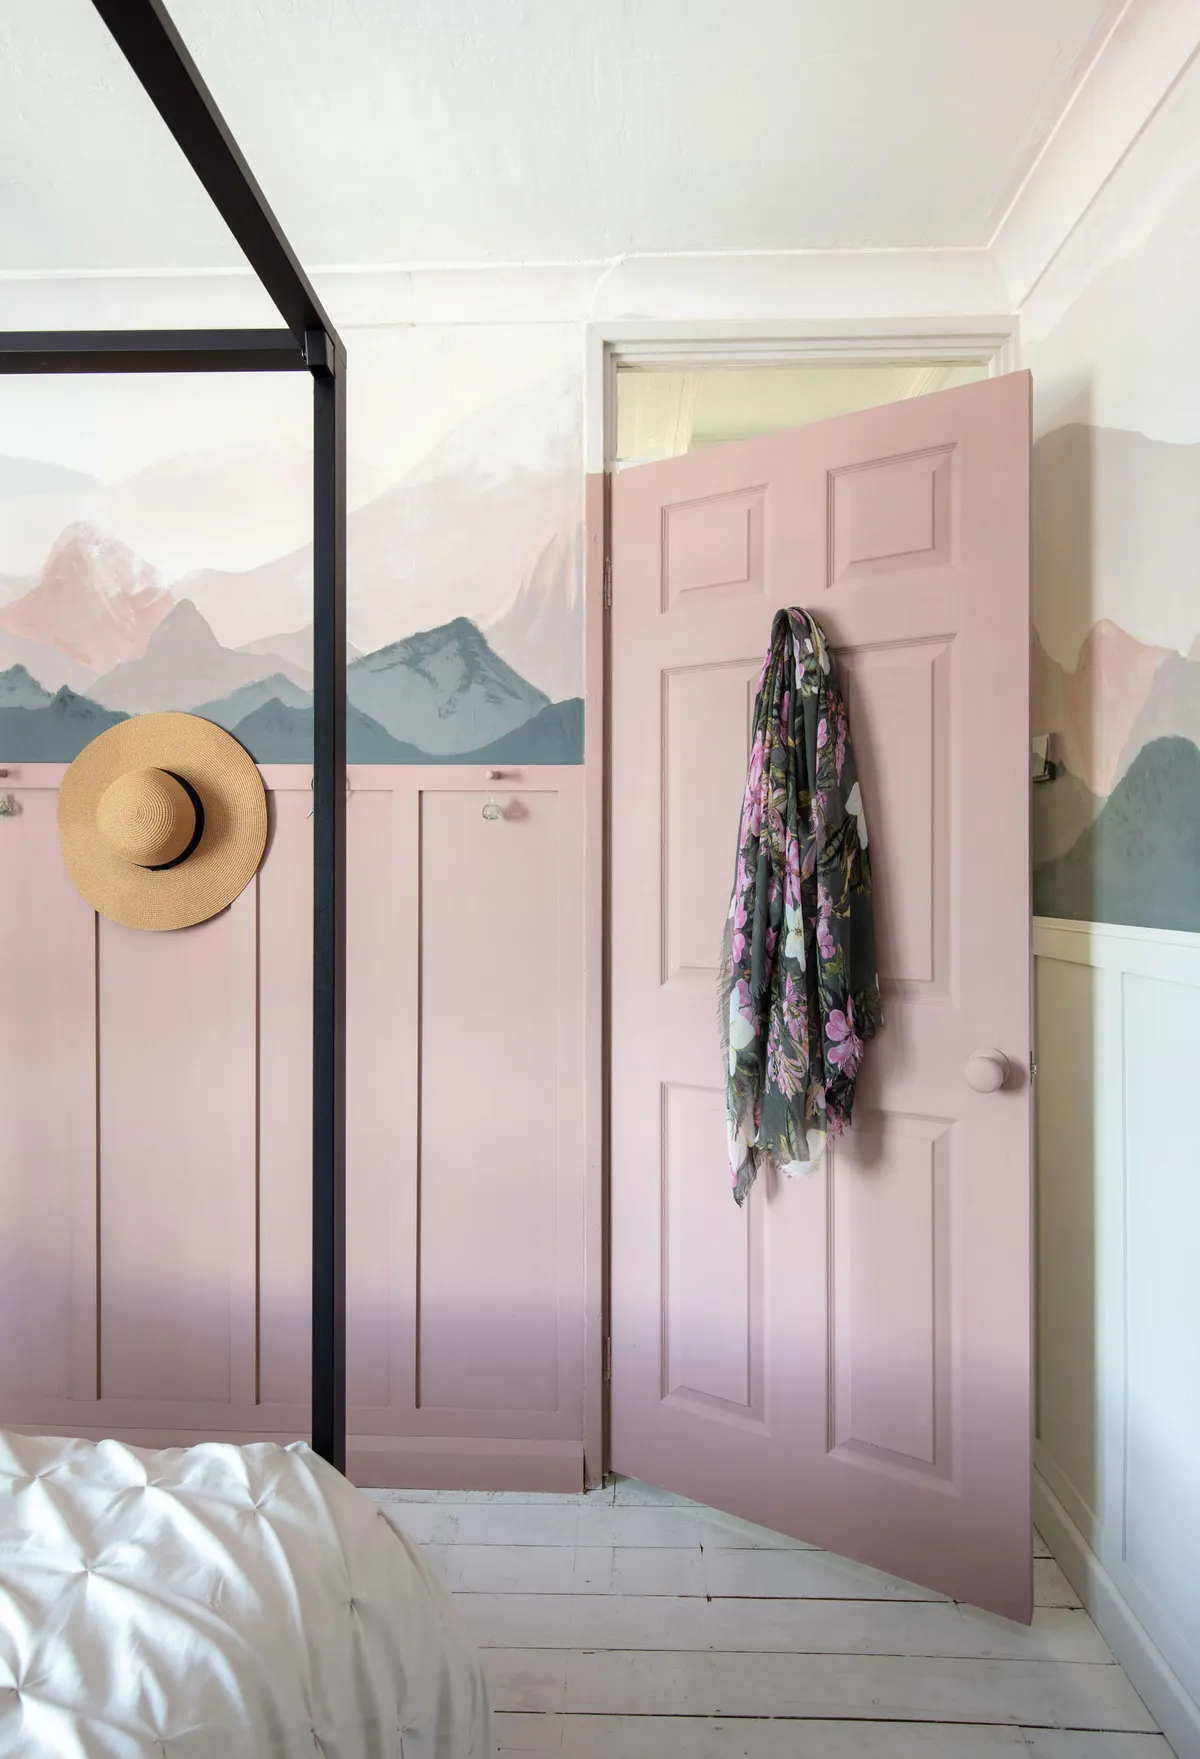 Claire sanded and painted the floorboards white to keep the scheme light. ‘It was a labour of love, but I find doing DIY relaxing,’ she says. She painted the door and frame pink with a white top section to match the mural